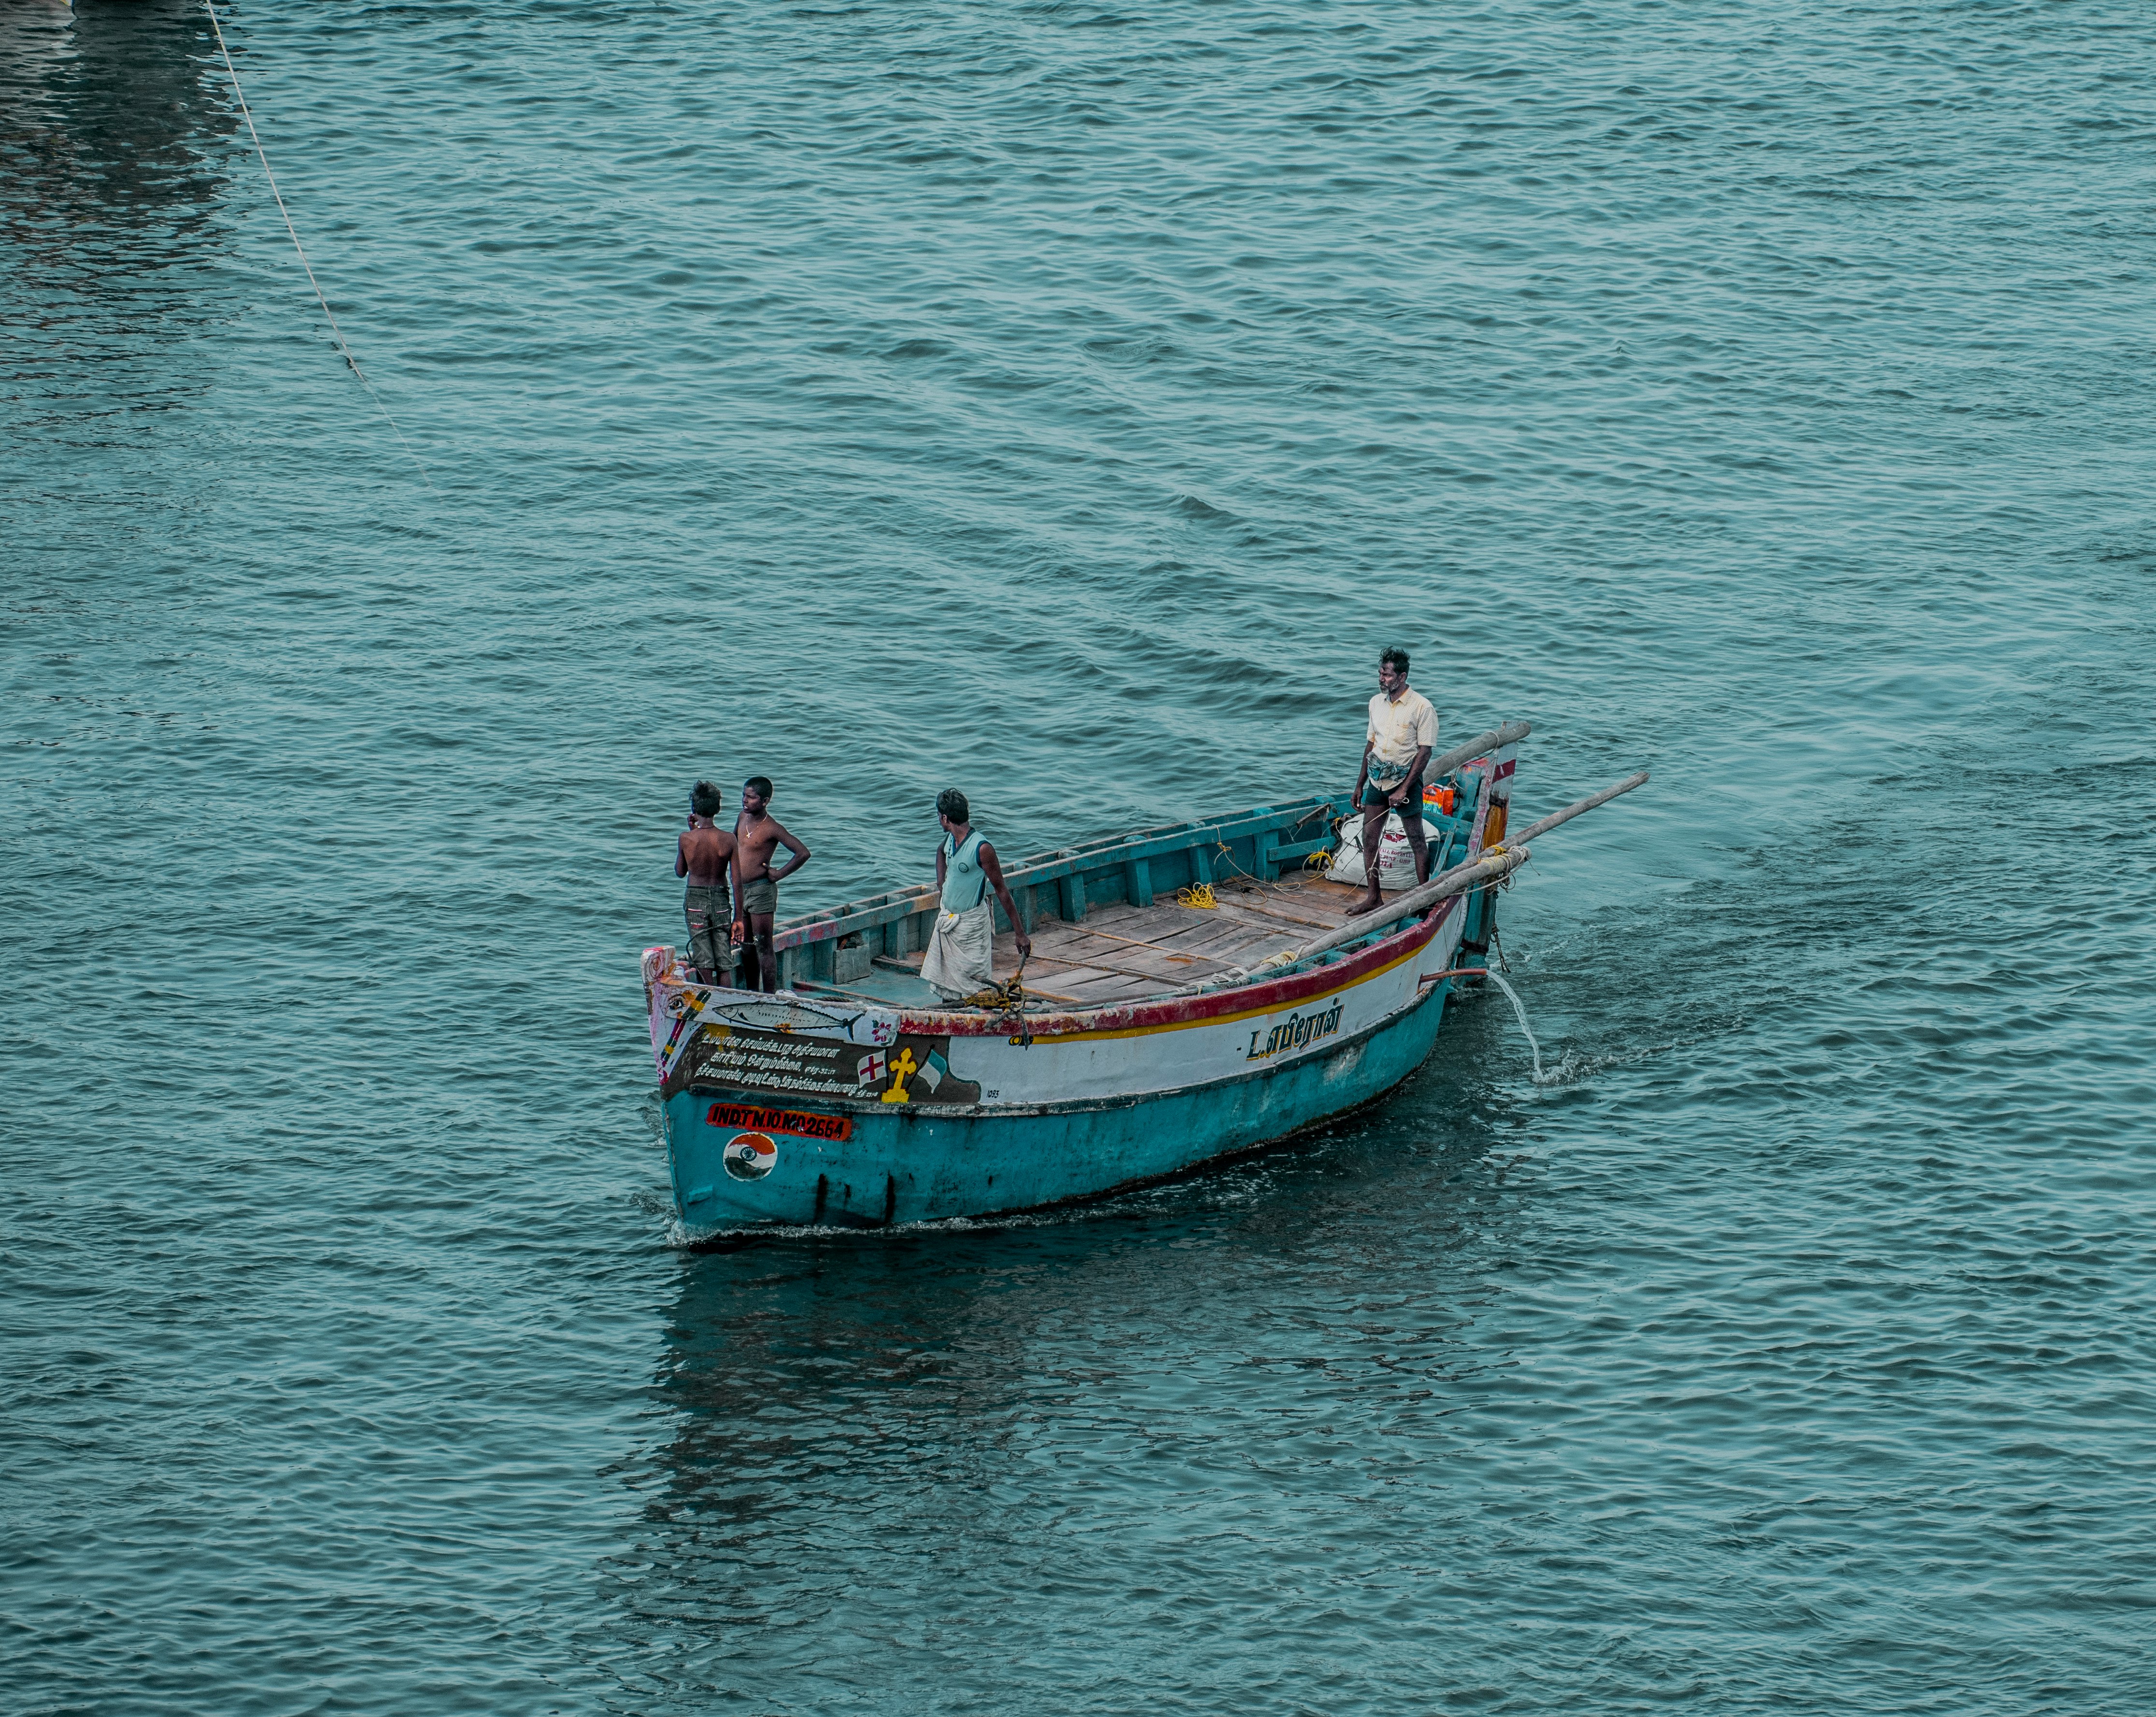 2 men and woman riding on boat on sea during daytime